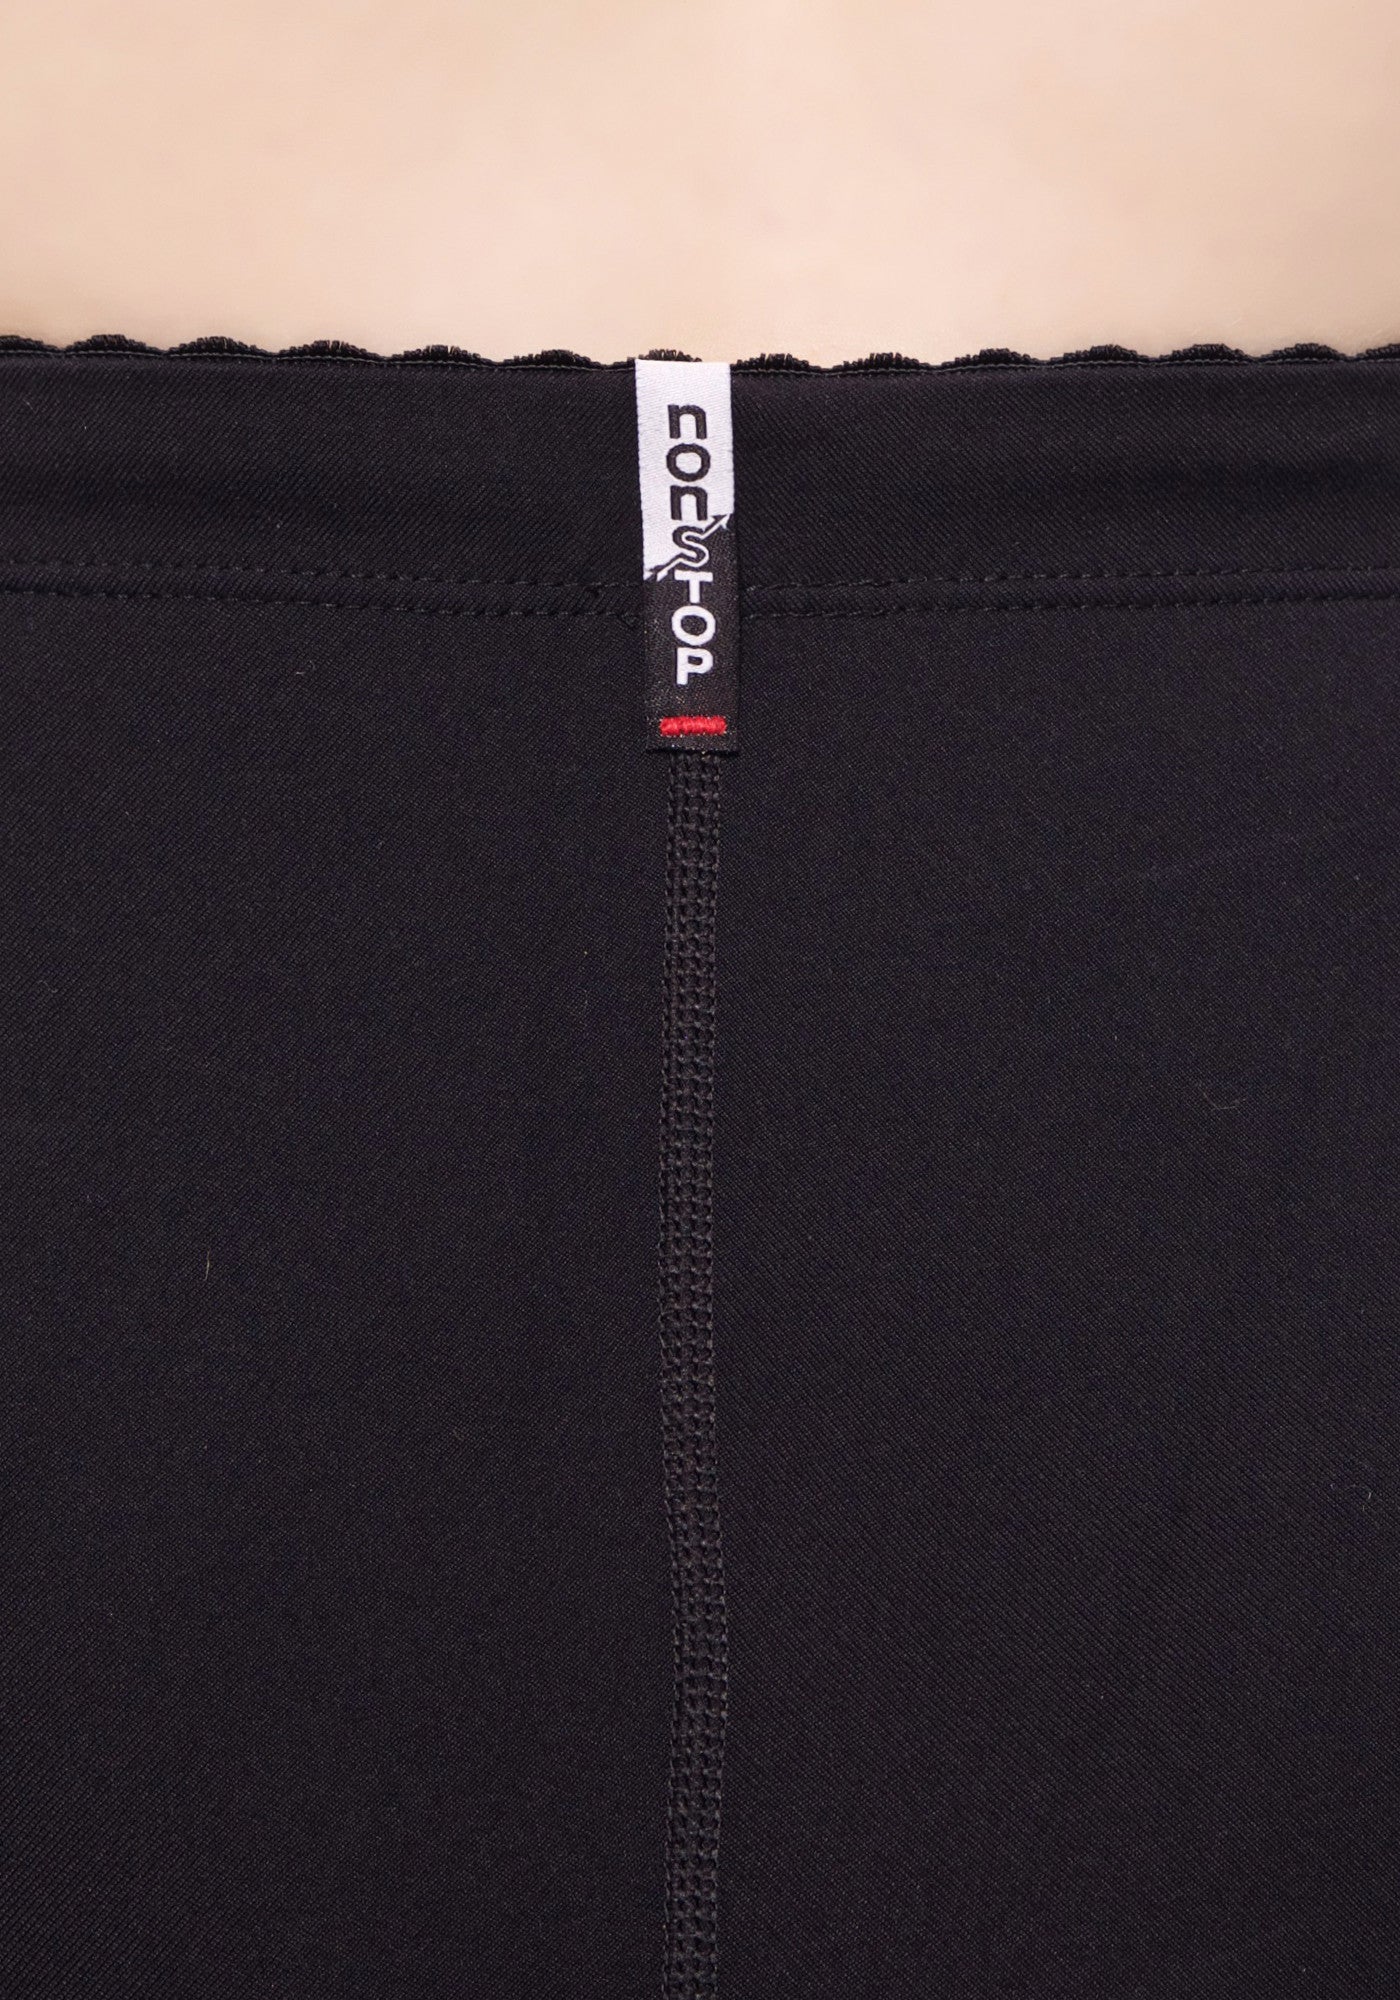 Check out this brand for excellent fit and craftsmanship. Close up view of the high waisted Diana legging in black shows the leather patch inside the knee. Made from high performance activewear fabric that wicks away moisture to keep you comfortable. 